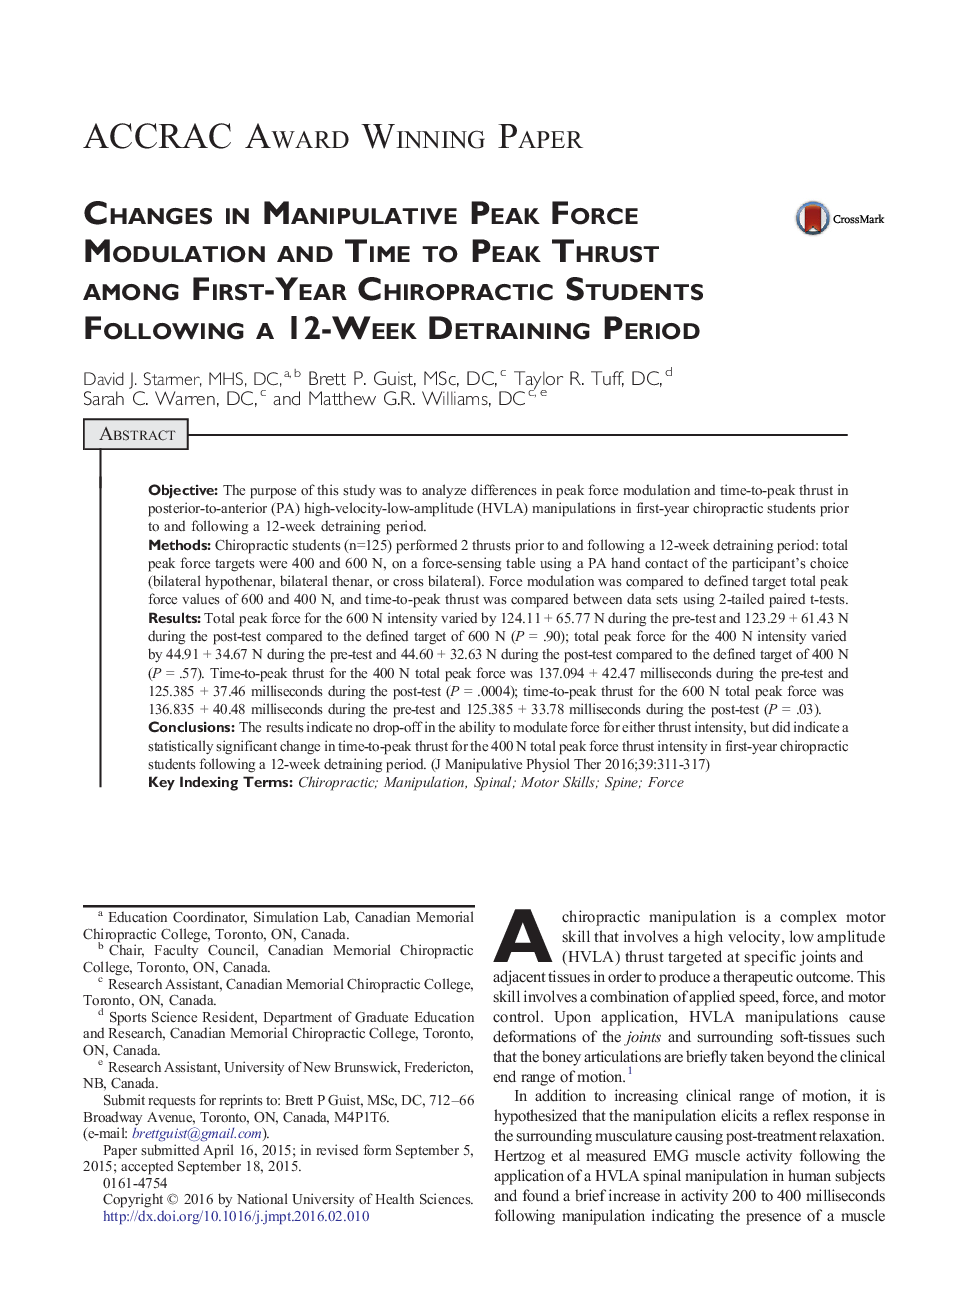 ACCRAC Award Winning PaperChanges in Manipulative Peak Force Modulation and Time to Peak Thrust among First-Year Chiropractic Students Following a 12-Week Detraining Period